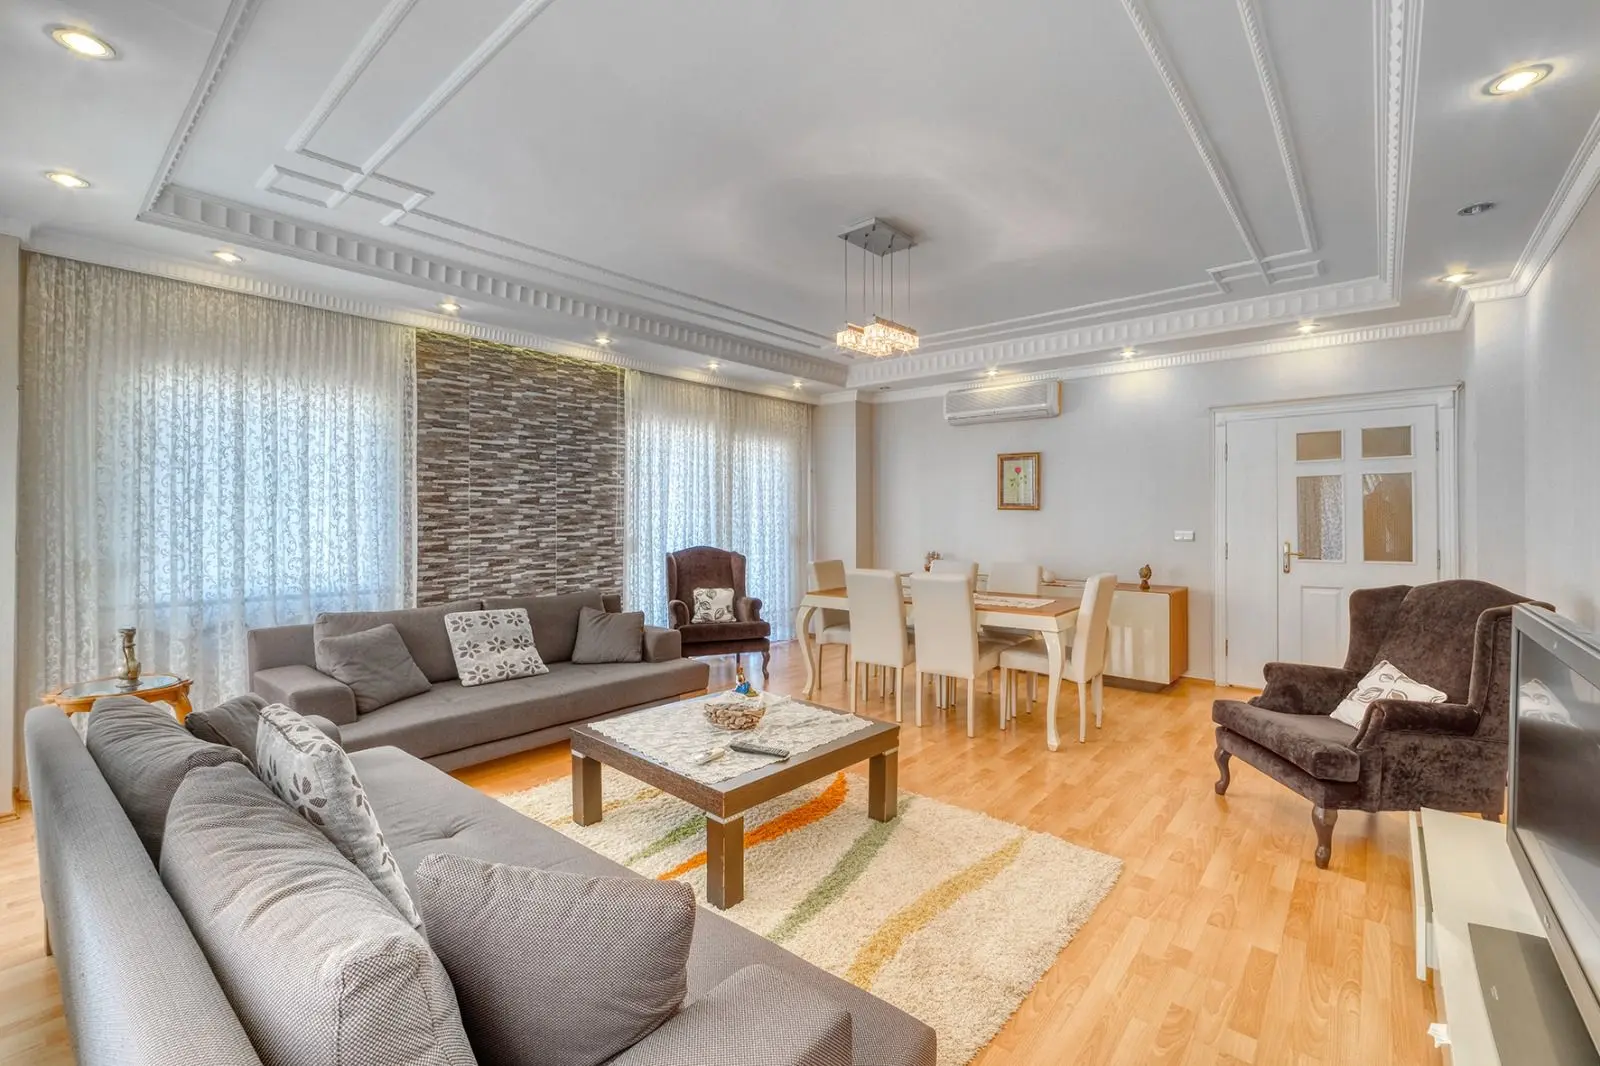 SUITABLE FOR CITIZENSHIP FURNISHED 4+1 APARTMENT (200M²) IN THE CENTER